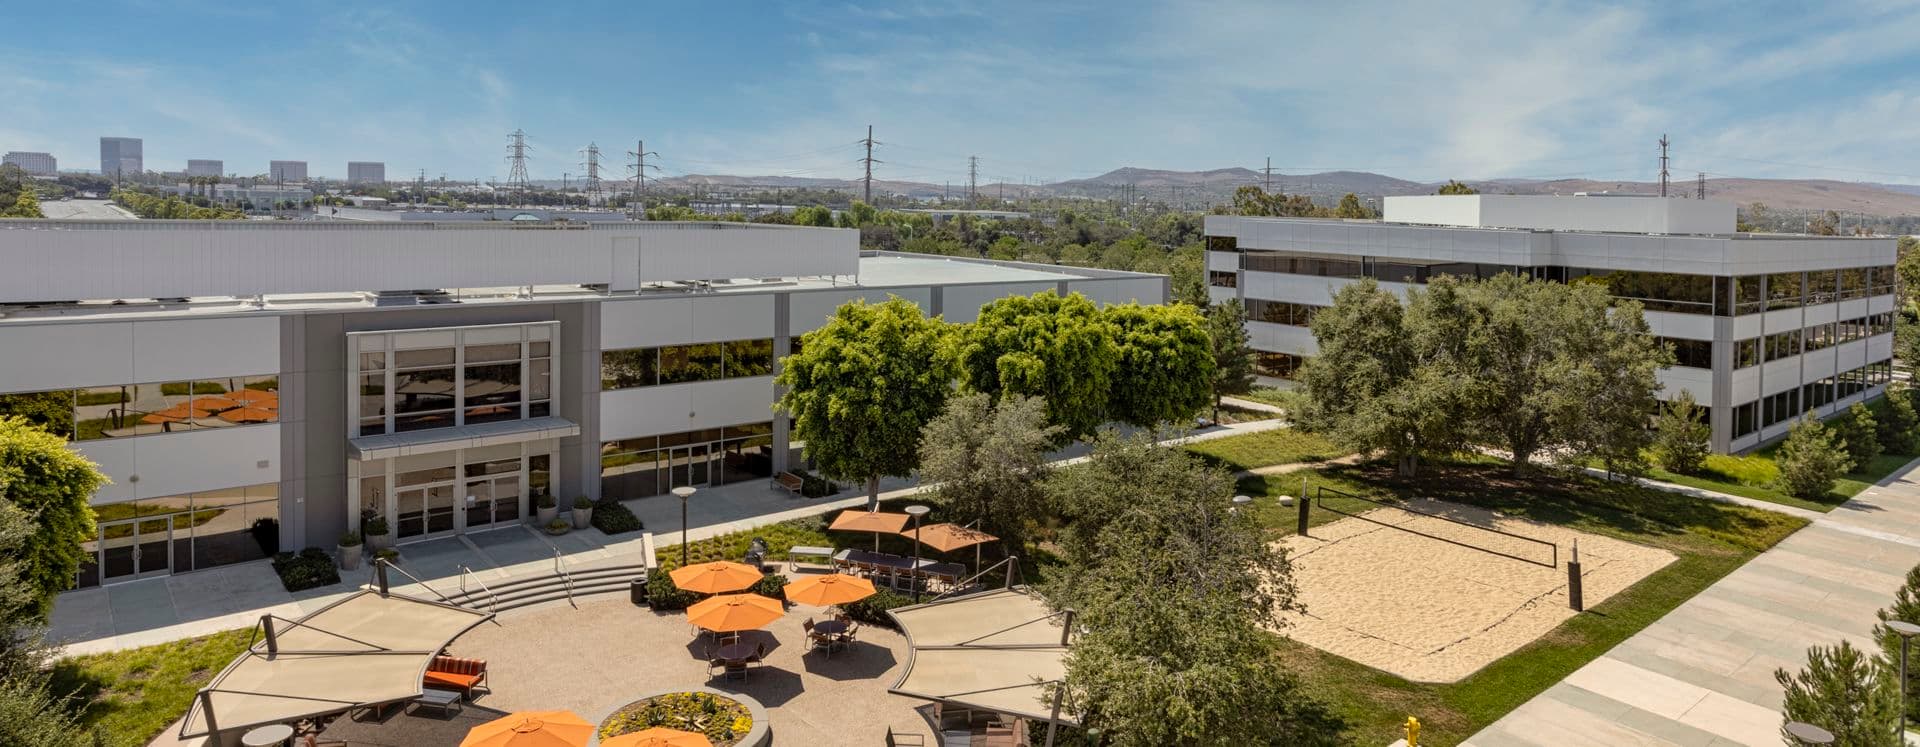 Photography of The Commons at Sand Canyon Business Center, NextGen Campus Office, Irvine, CA.